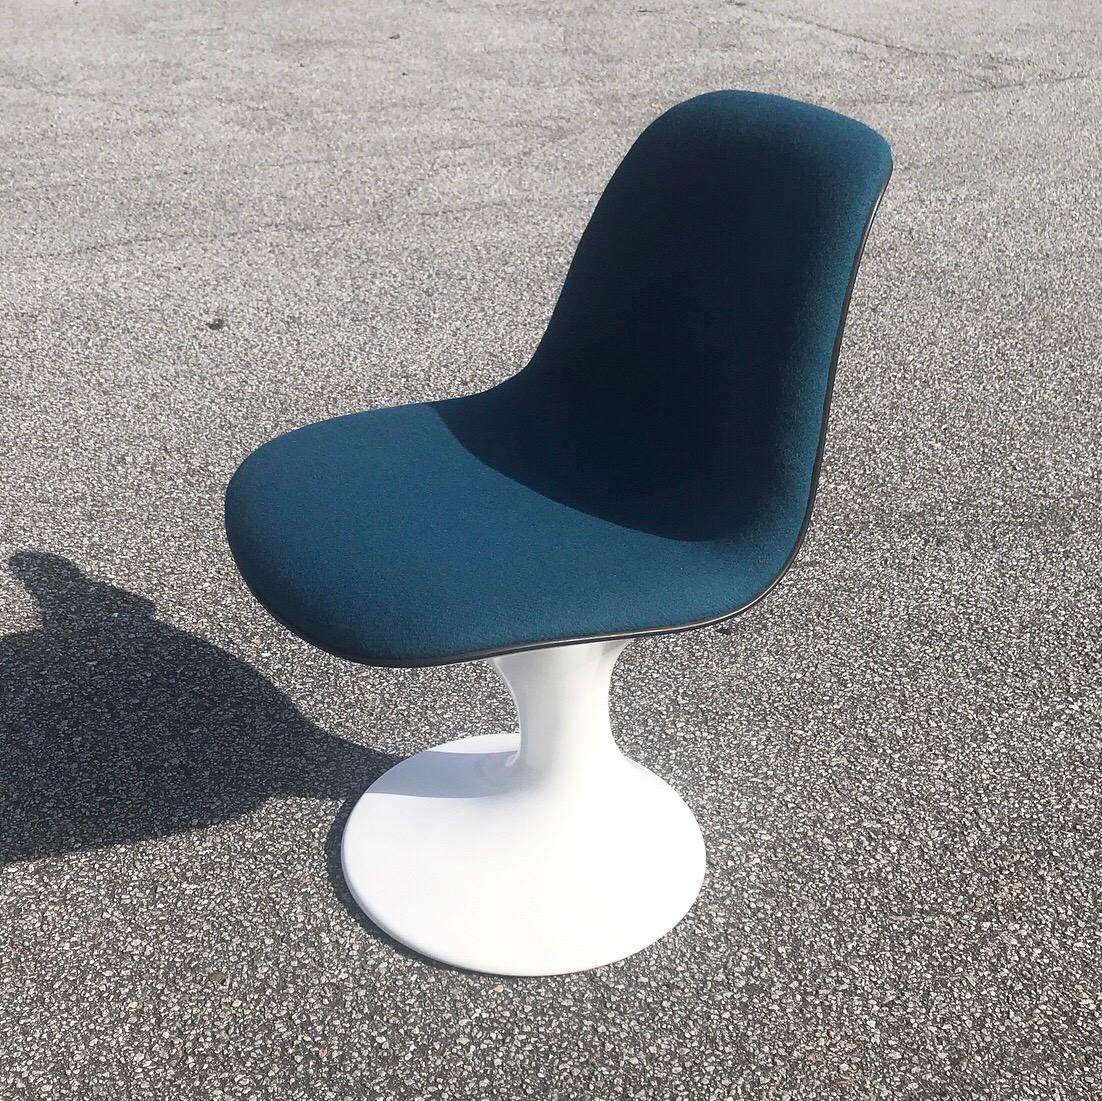 Space Age Set of Four Orbit Dining Chairs by Farner and Grunder for Herman Miller, 1960s